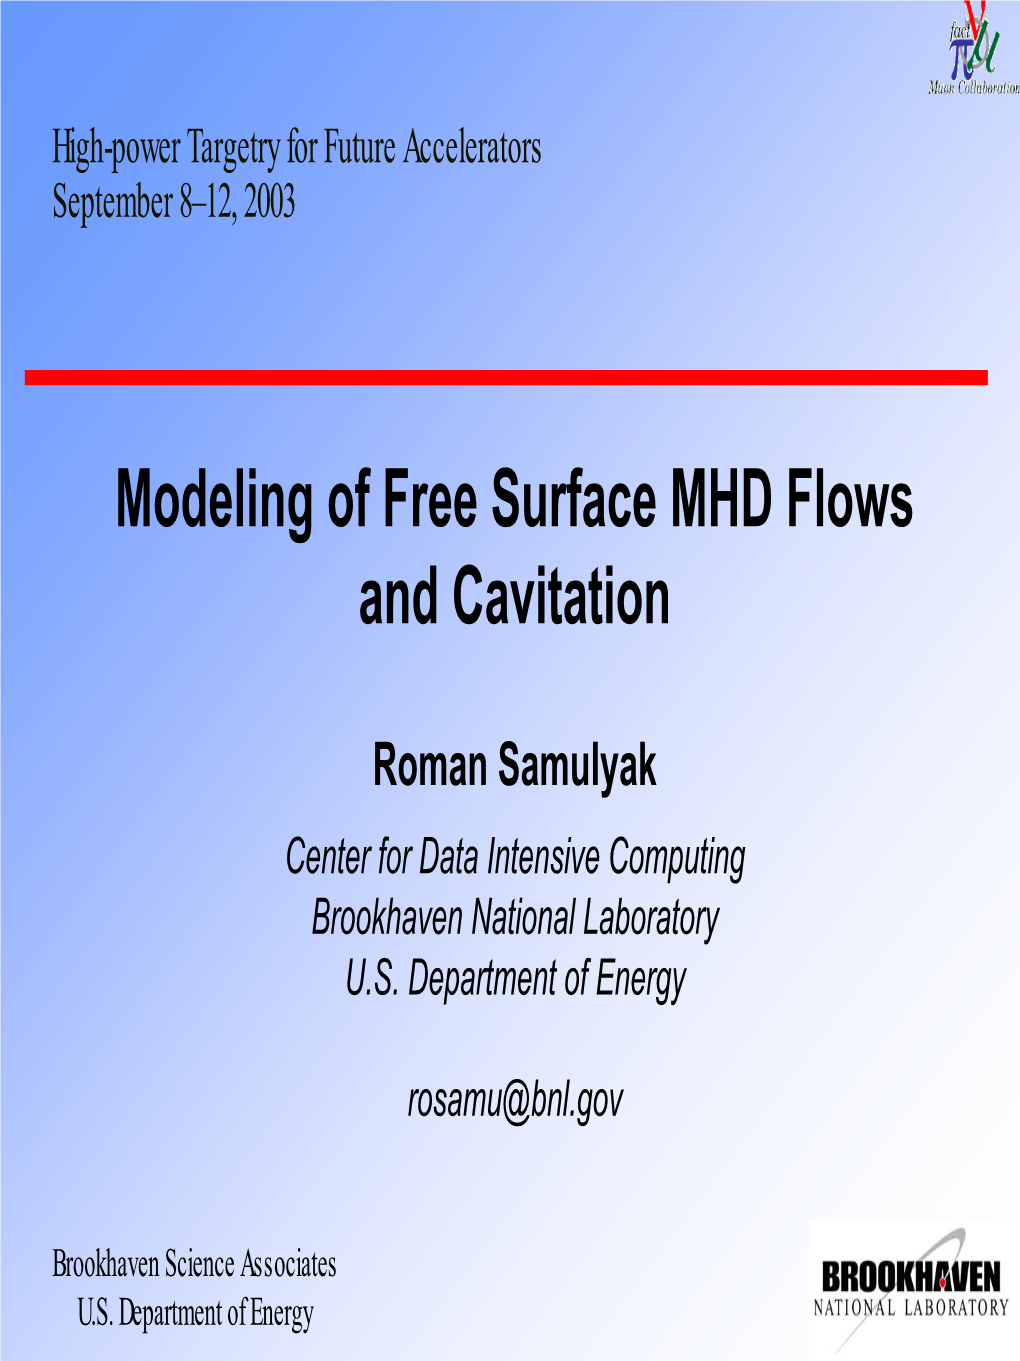 Modeling of Free Surface MHD Flows and Cavitation